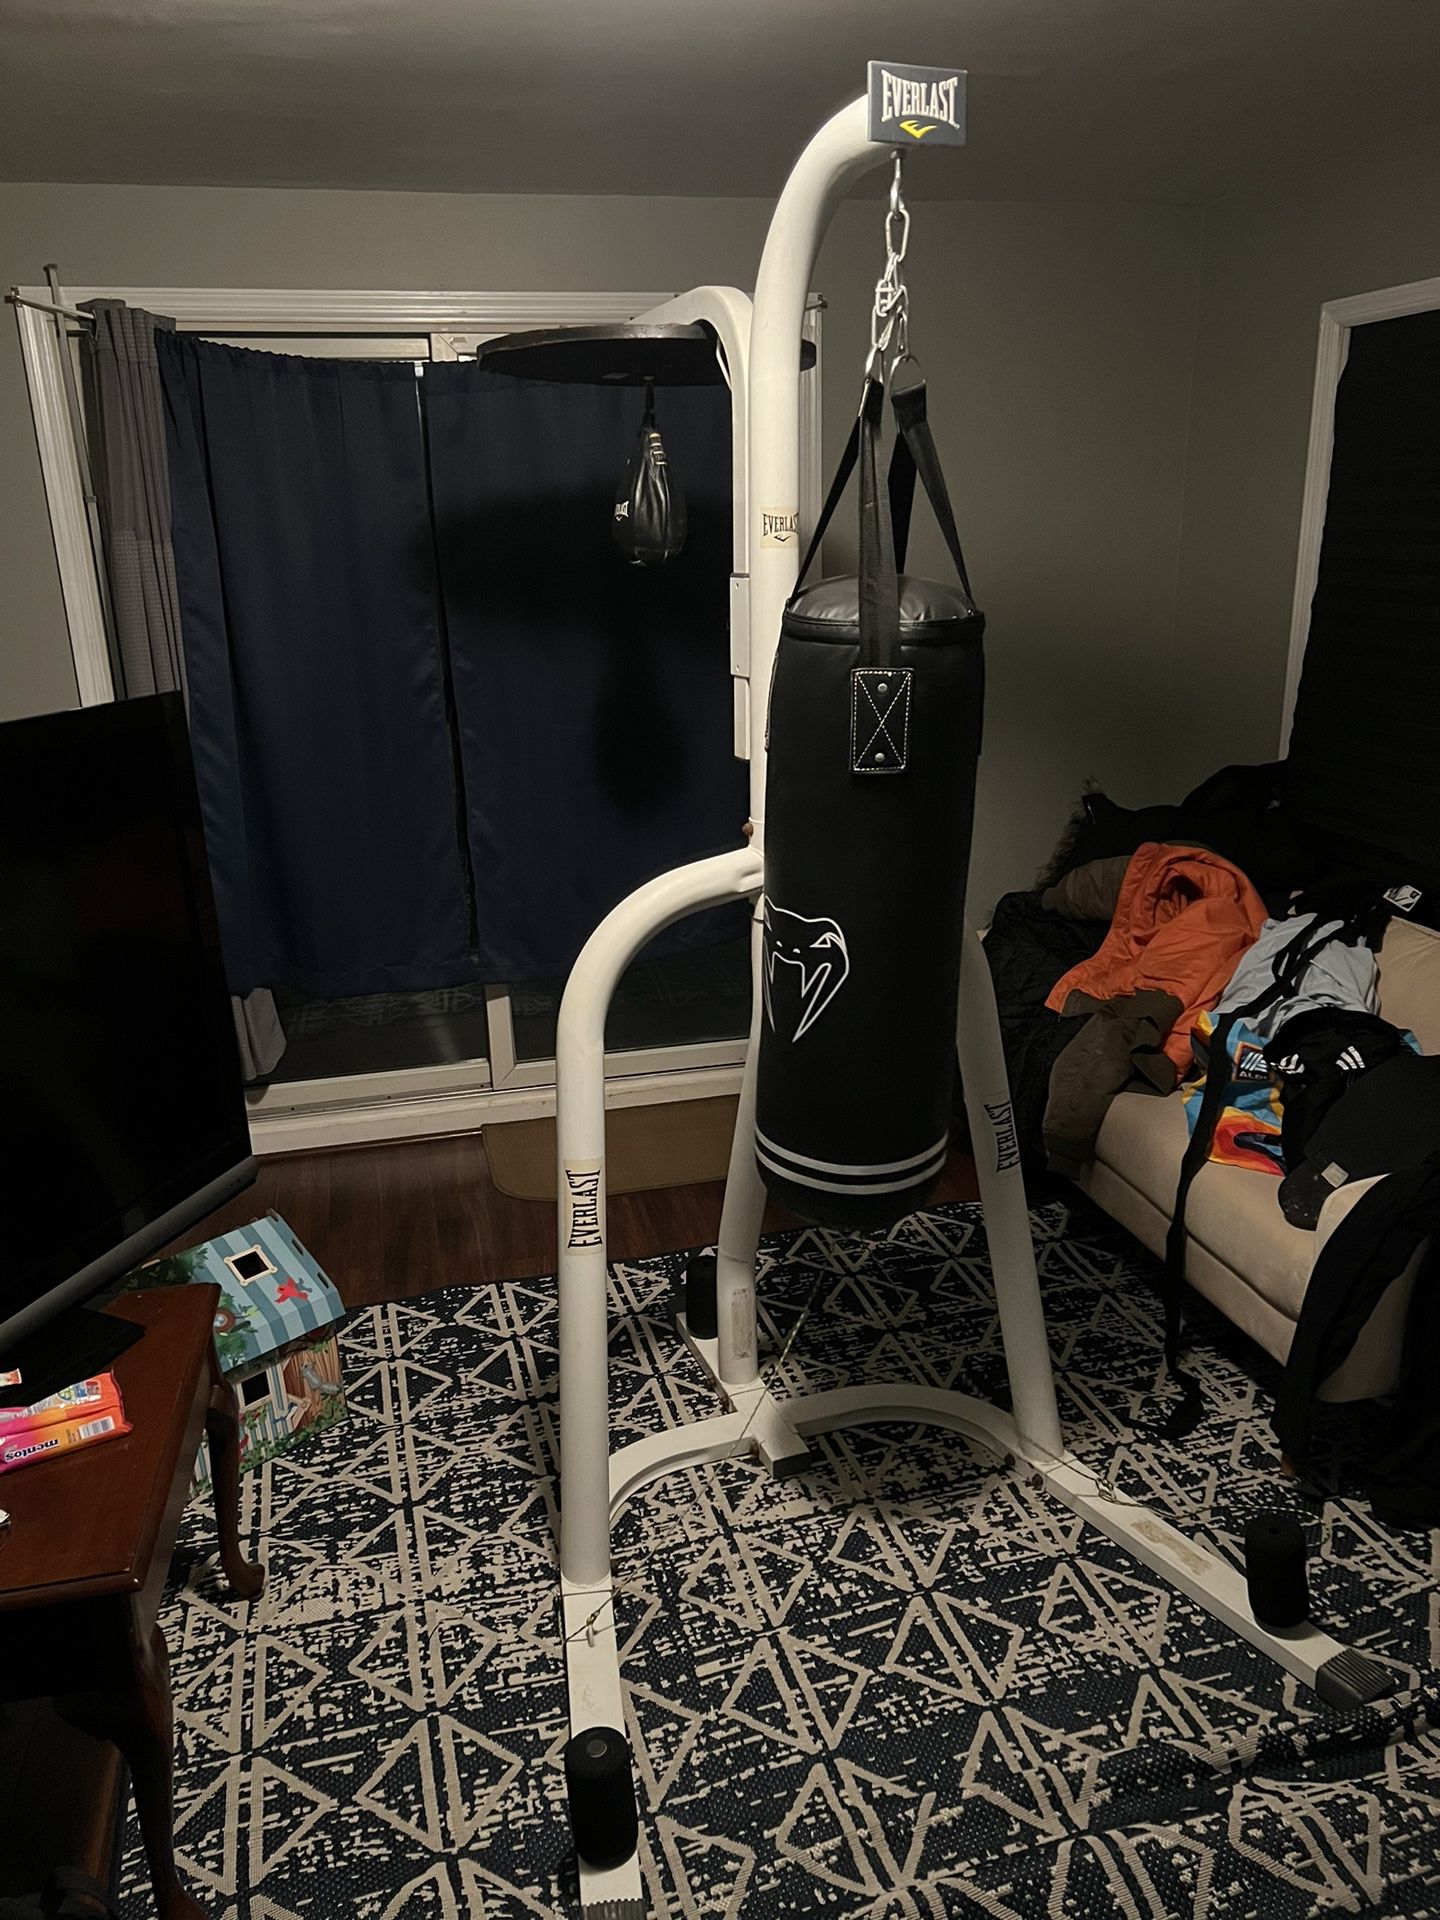 Practically new Everlast Heavy Bag and Speed bag stand with brand new Venum heavybag